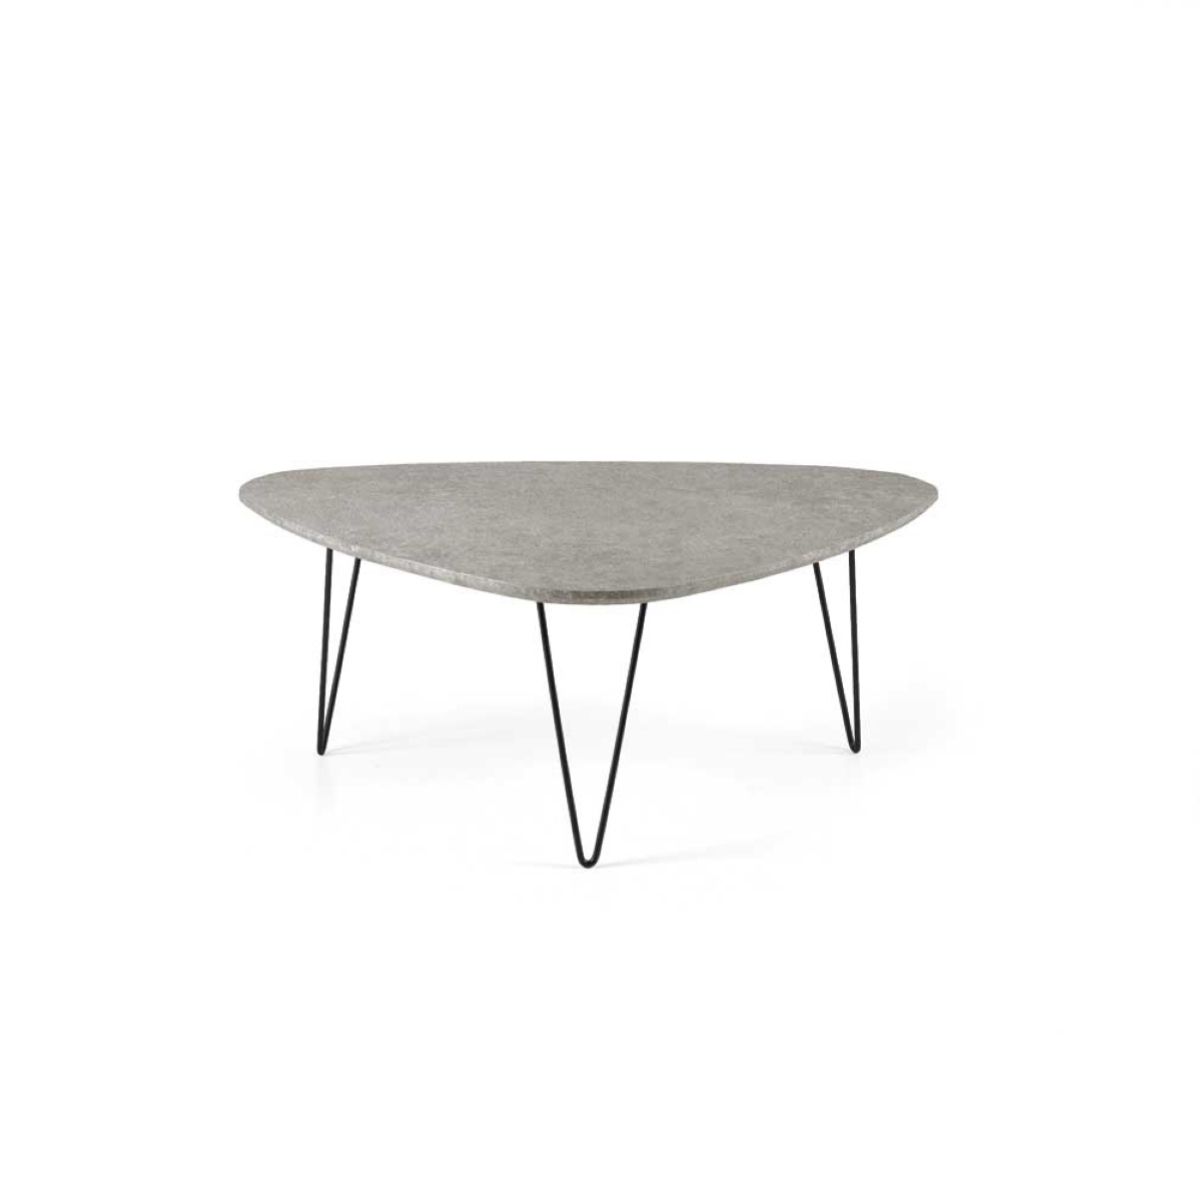 Nico Coffee Table With Concrete Shaped Wood Top And Metal Legs Pertaining To 2020 Iron Legs Coffee Tables (View 15 of 20)